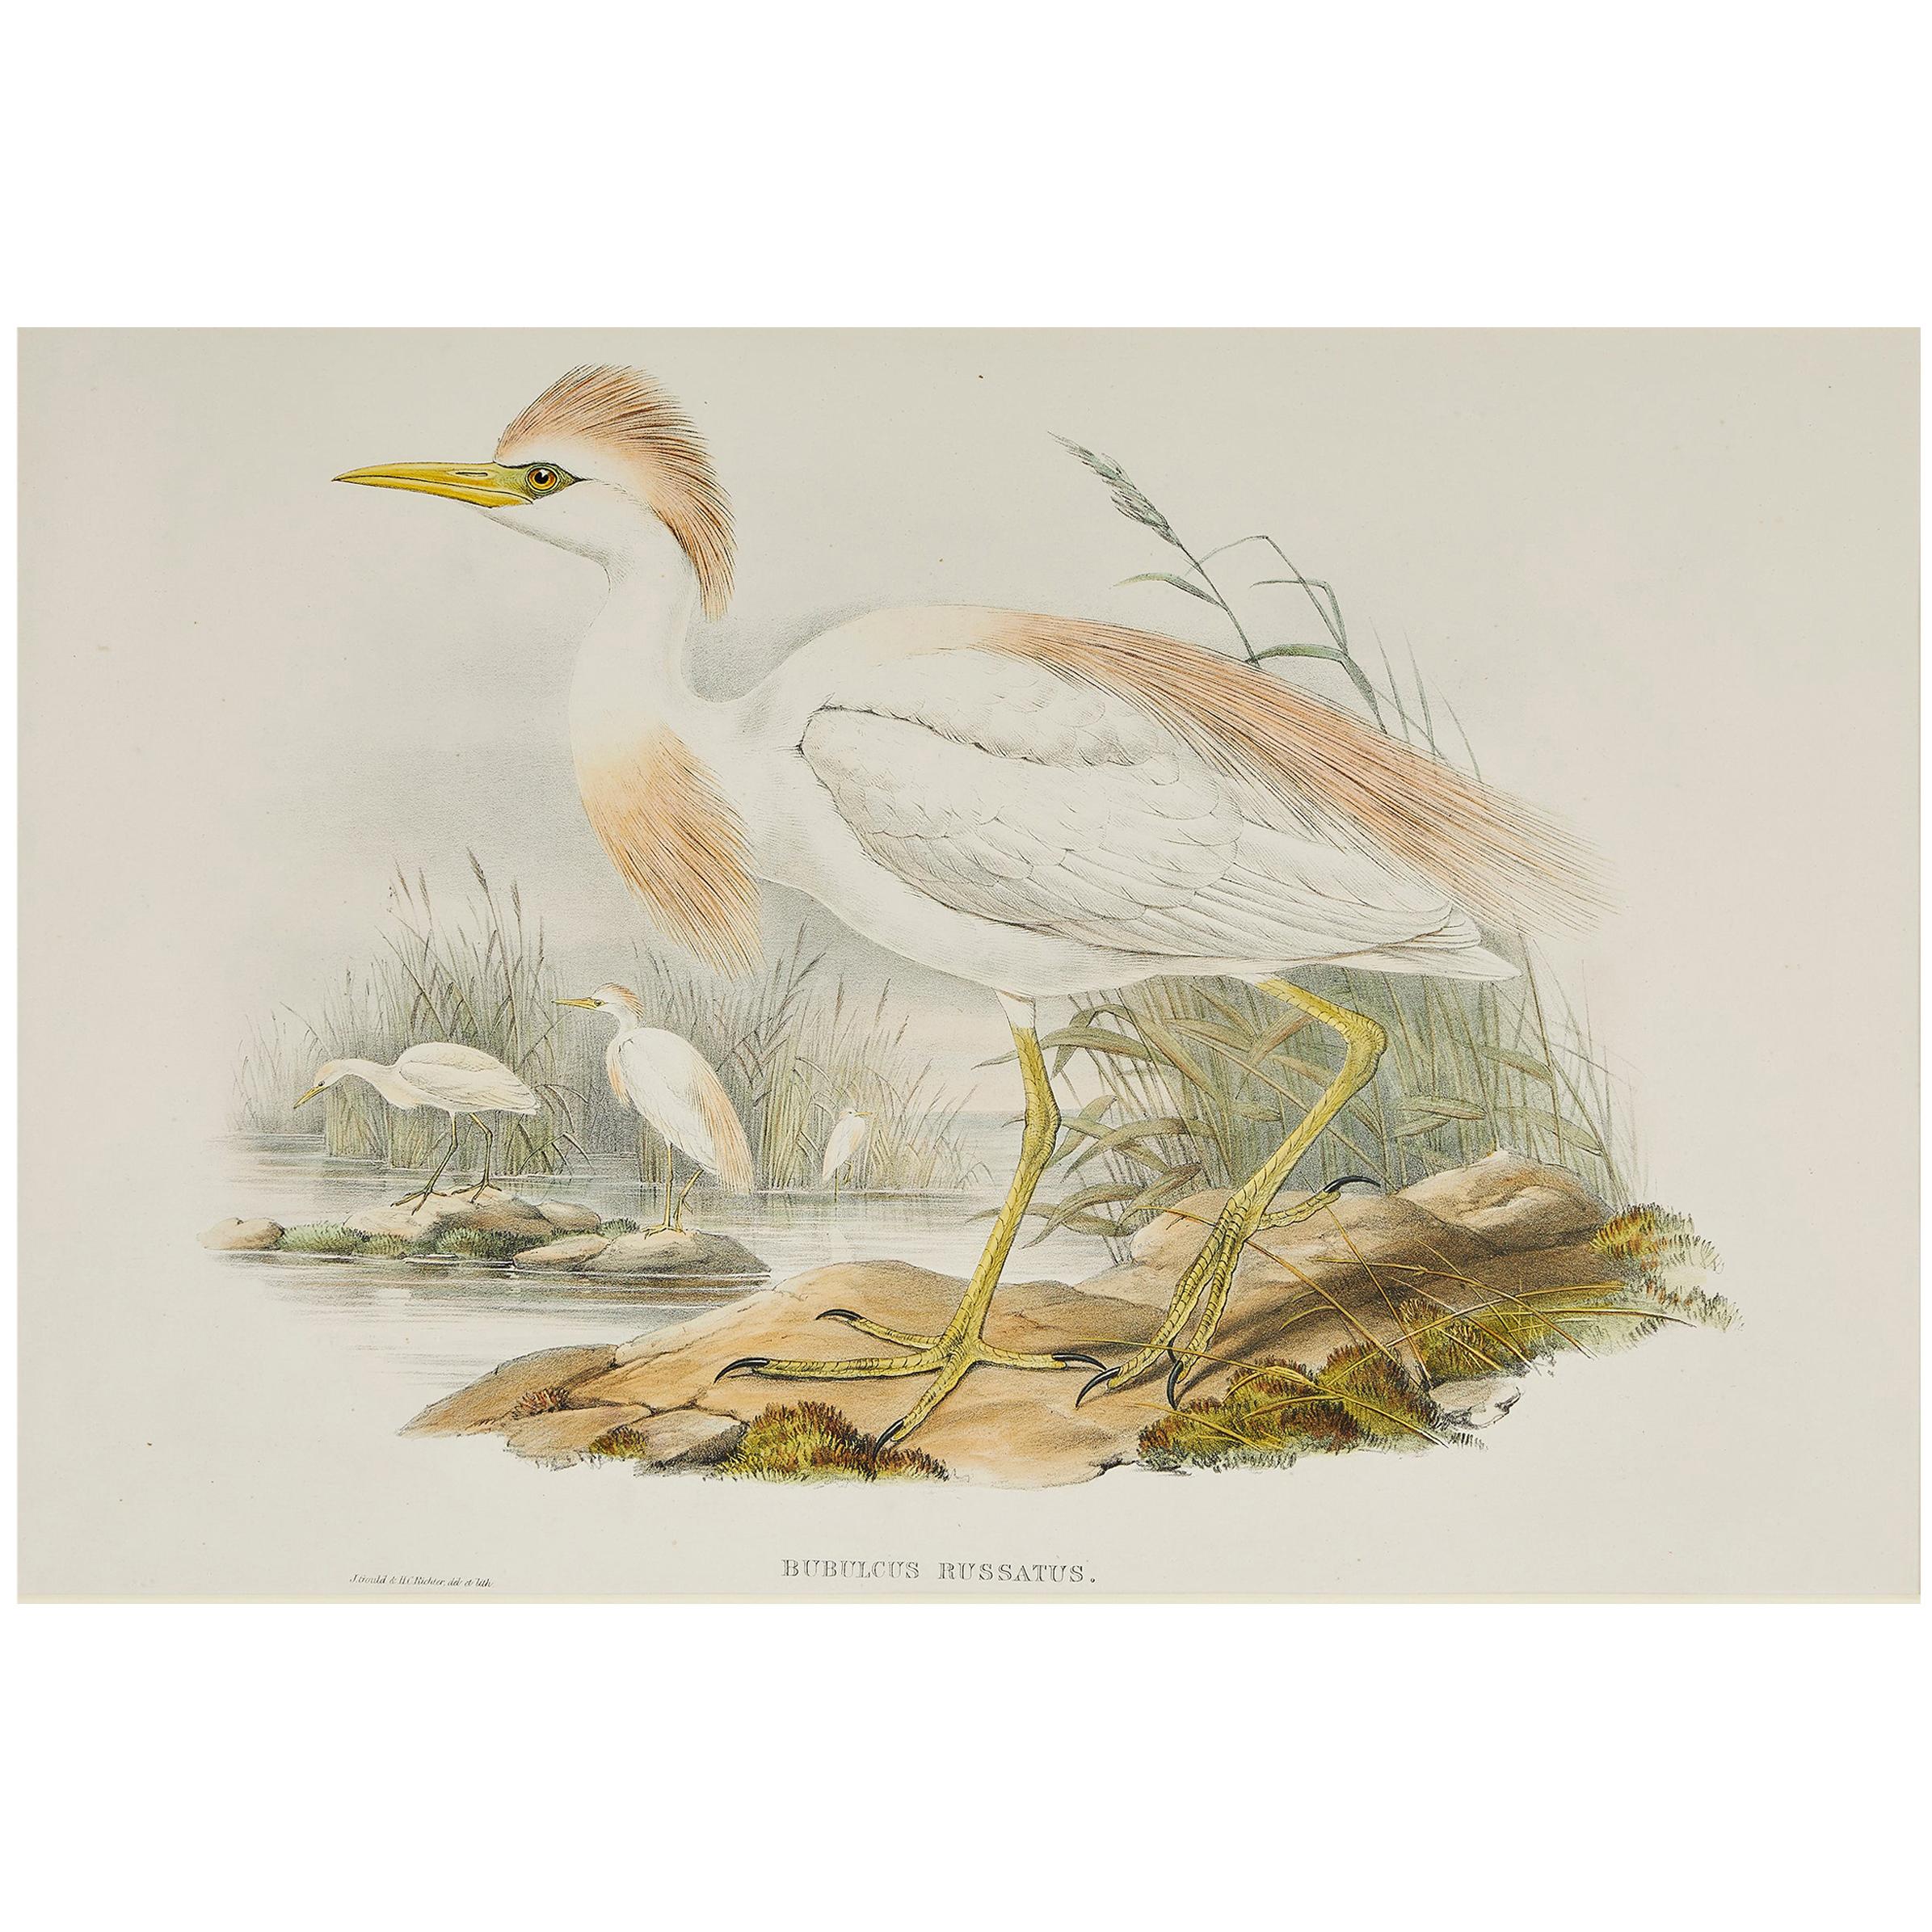 John Gould Lithograph from 'The Birds of Great Britain'